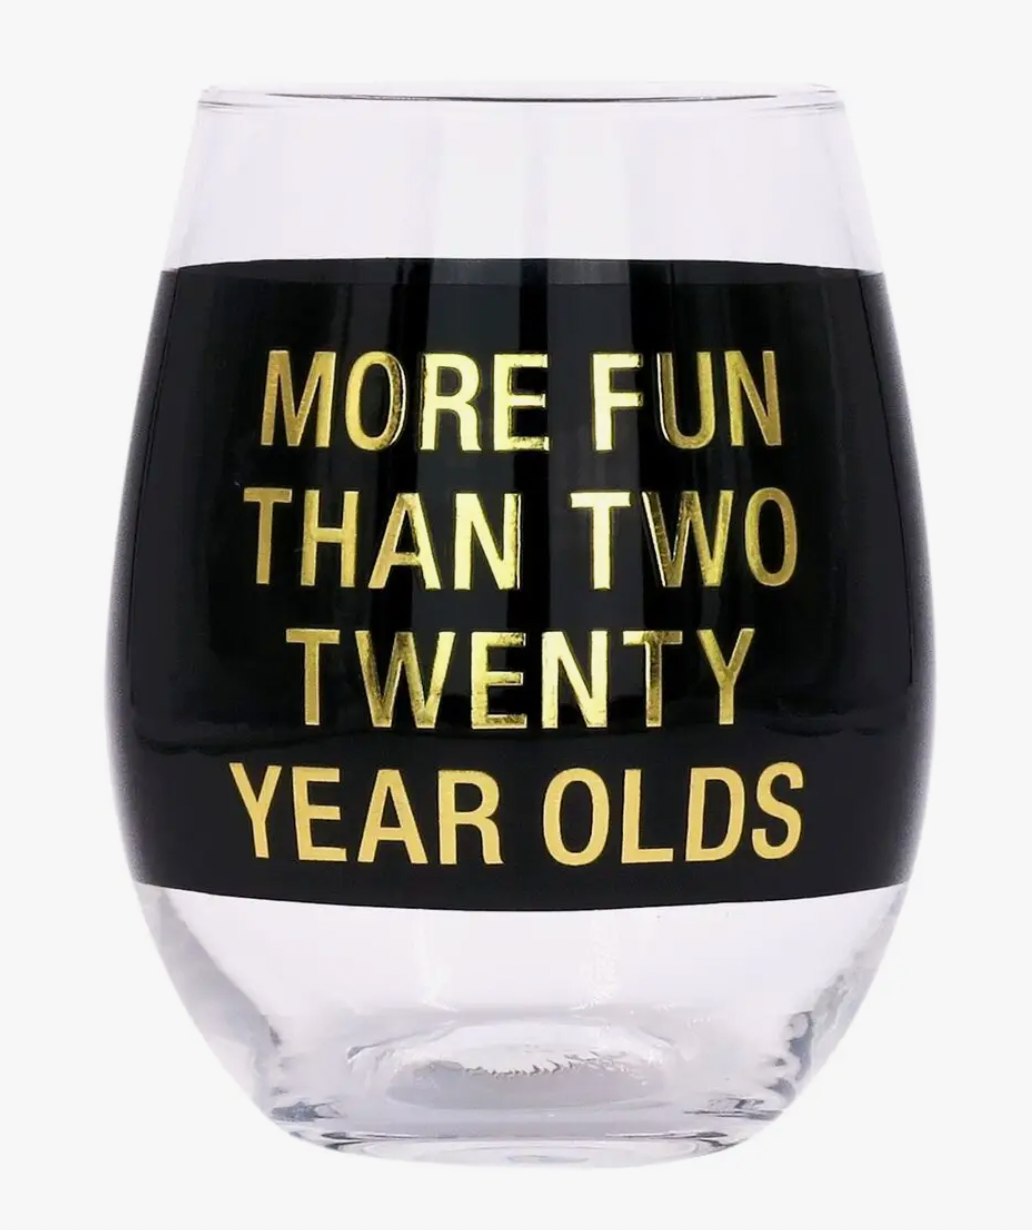 ABOUT FACE DESIGNS WINE GLASS